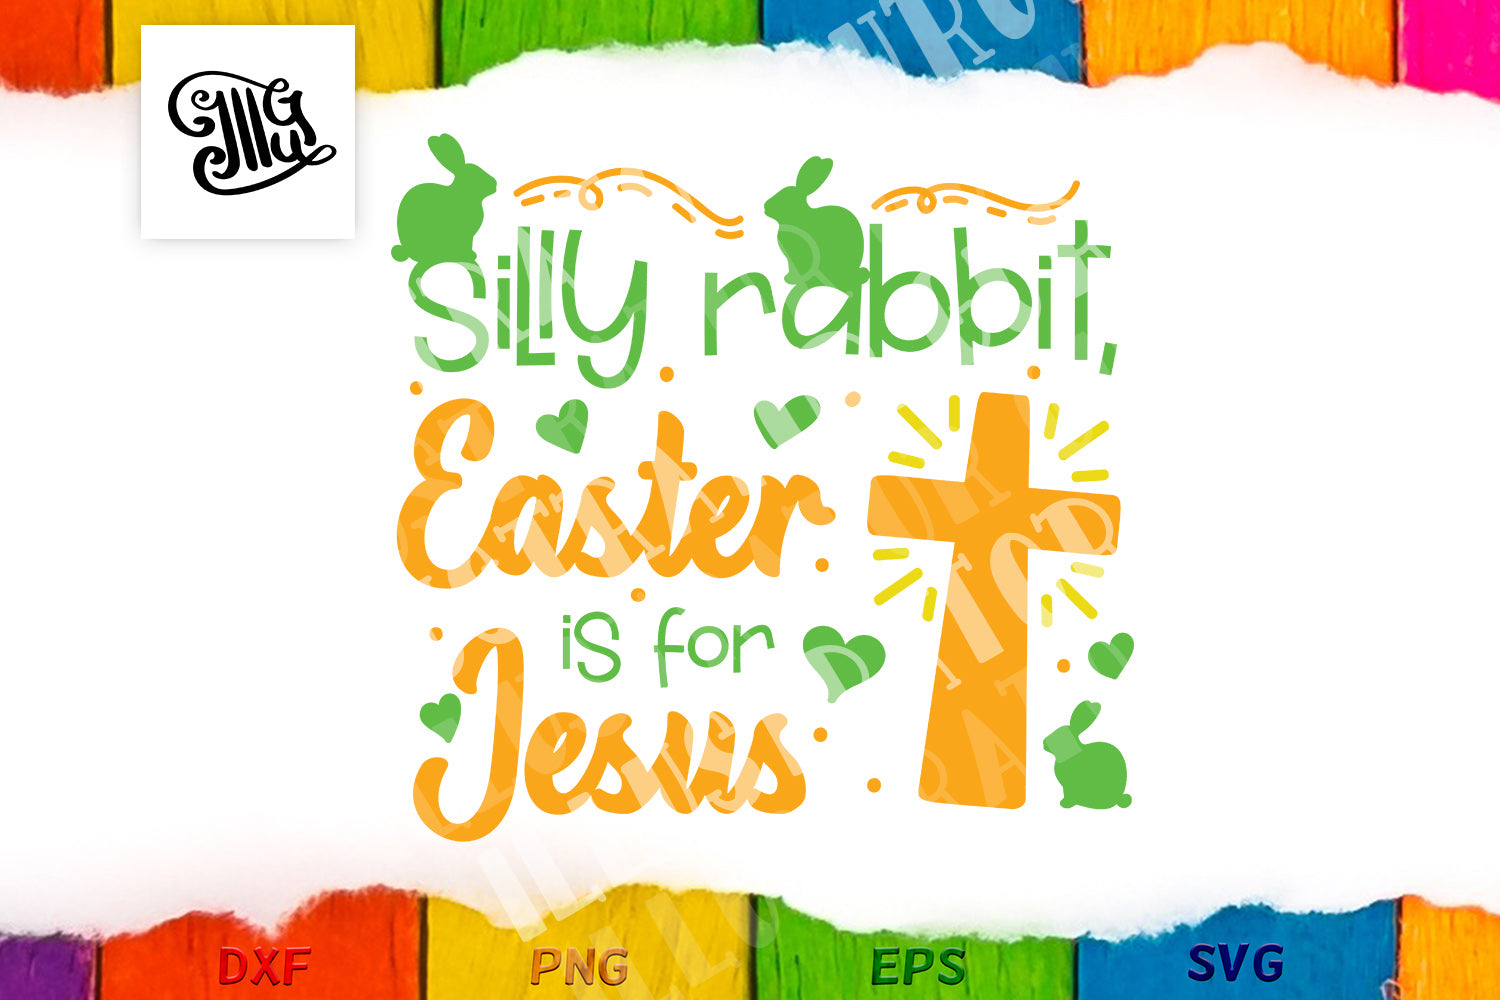 Download Silly rabbit, Easter is for Jesus svg | Religious Easter ...